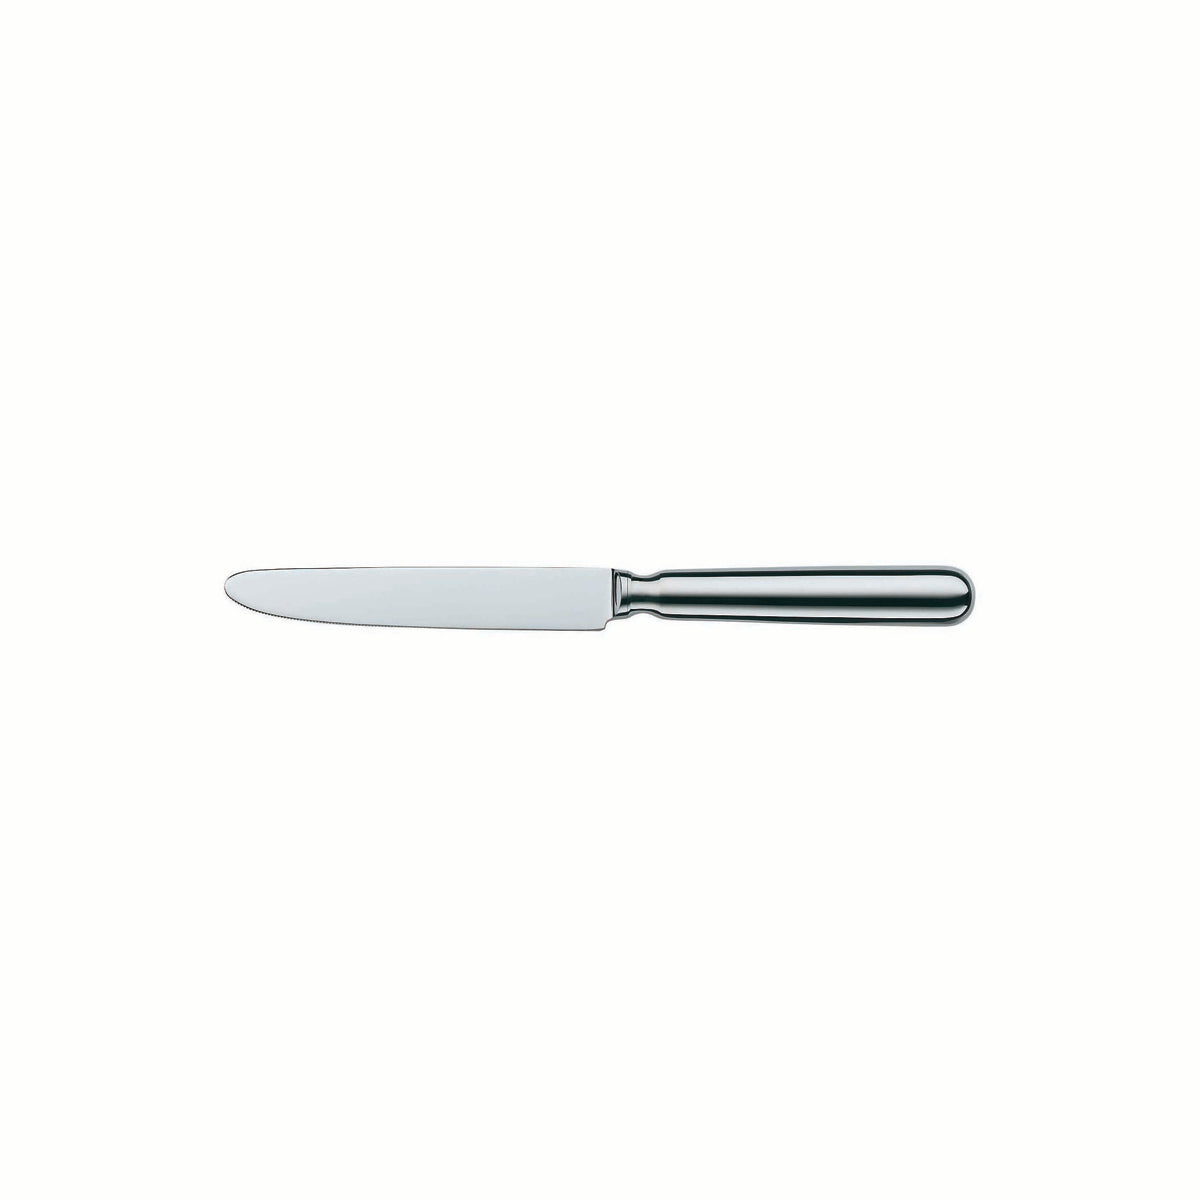 11.0103.6047 WMF Baguette Table Knife - Hollow Handle Stainless Steel Tomkin Australia Hospitality Supplies